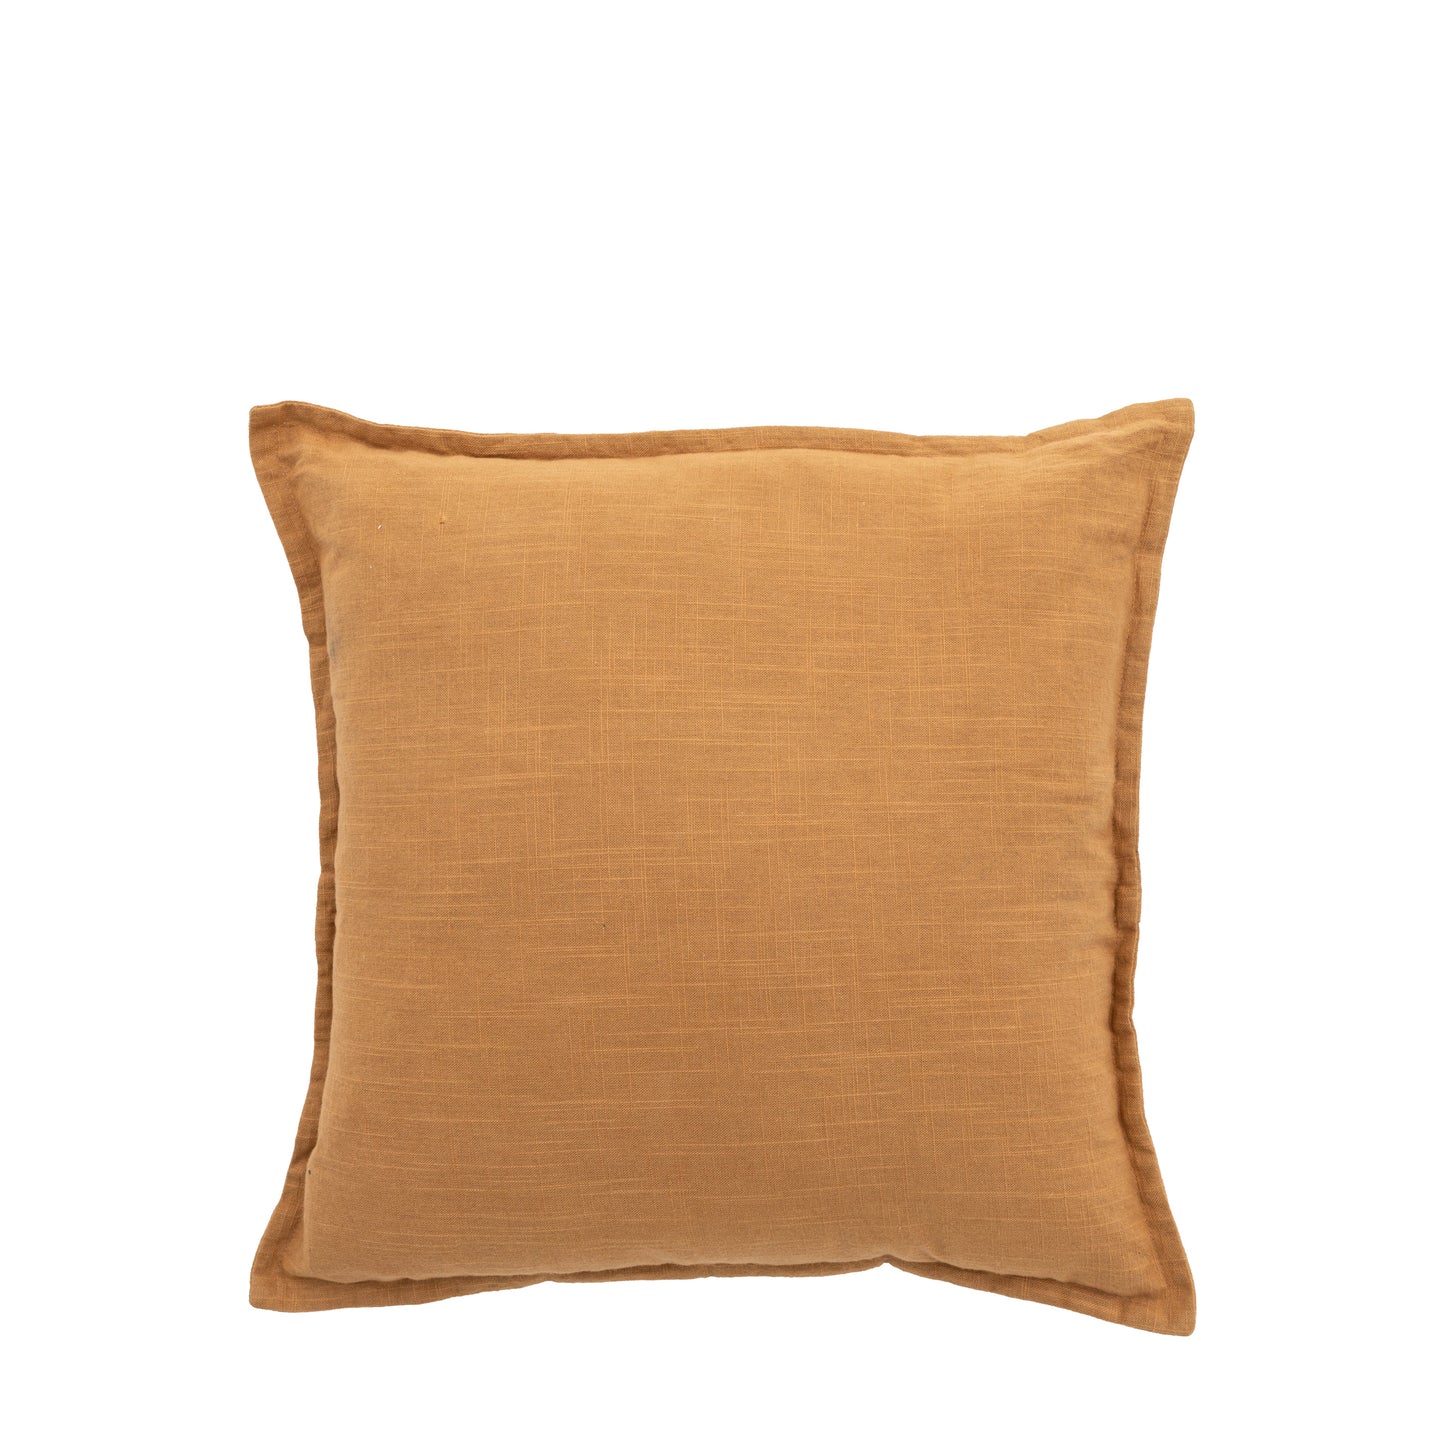 Provence Mustard Cushion Cover 450x450mm